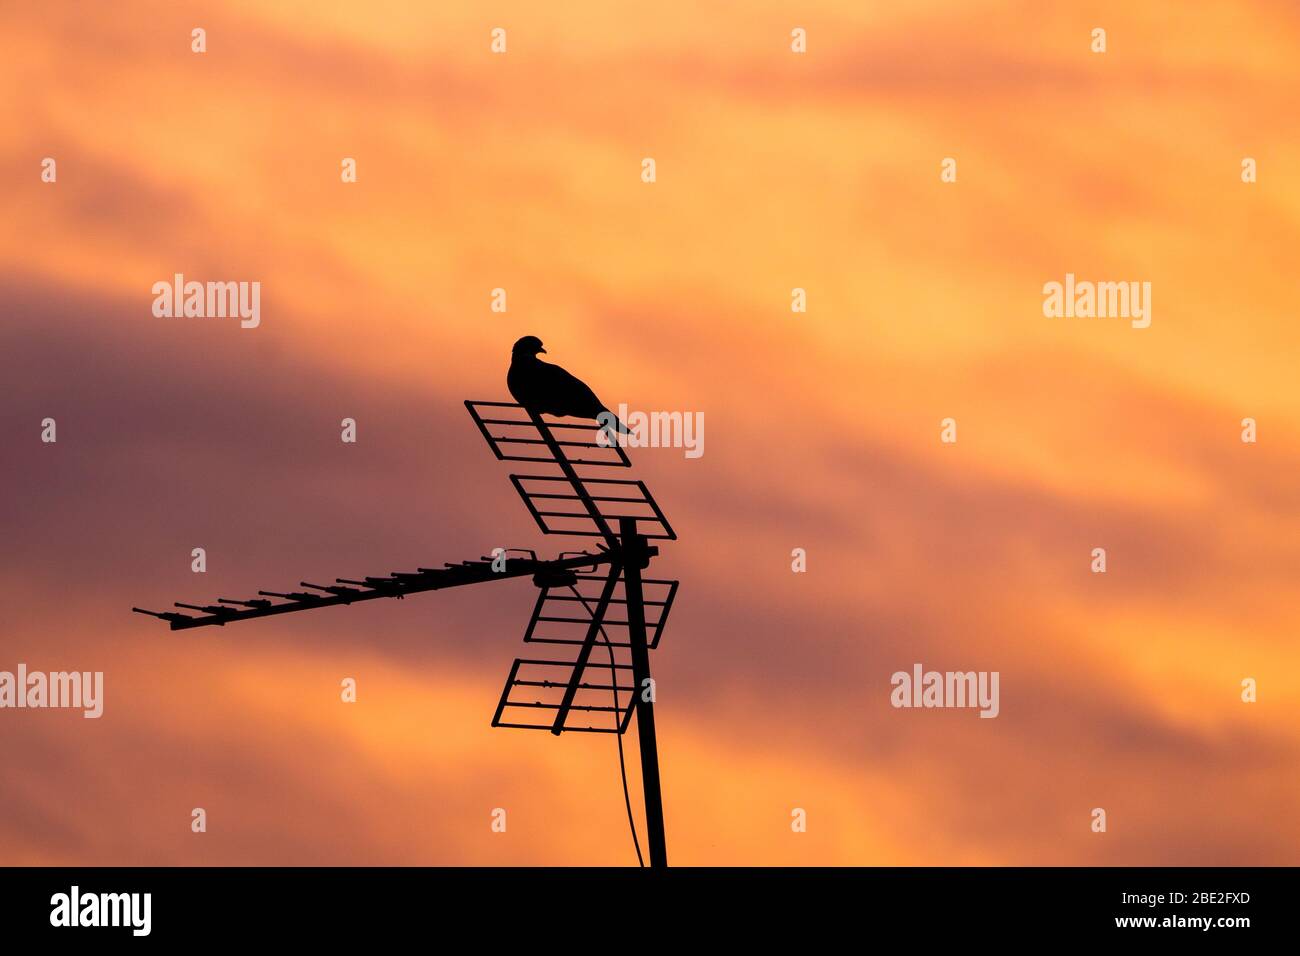 Pigeon resting on a house antenna in the evening. Silhouette of a bird sleeping on the antenna of a city house at sunset. Sunset with space for text. Stock Photo